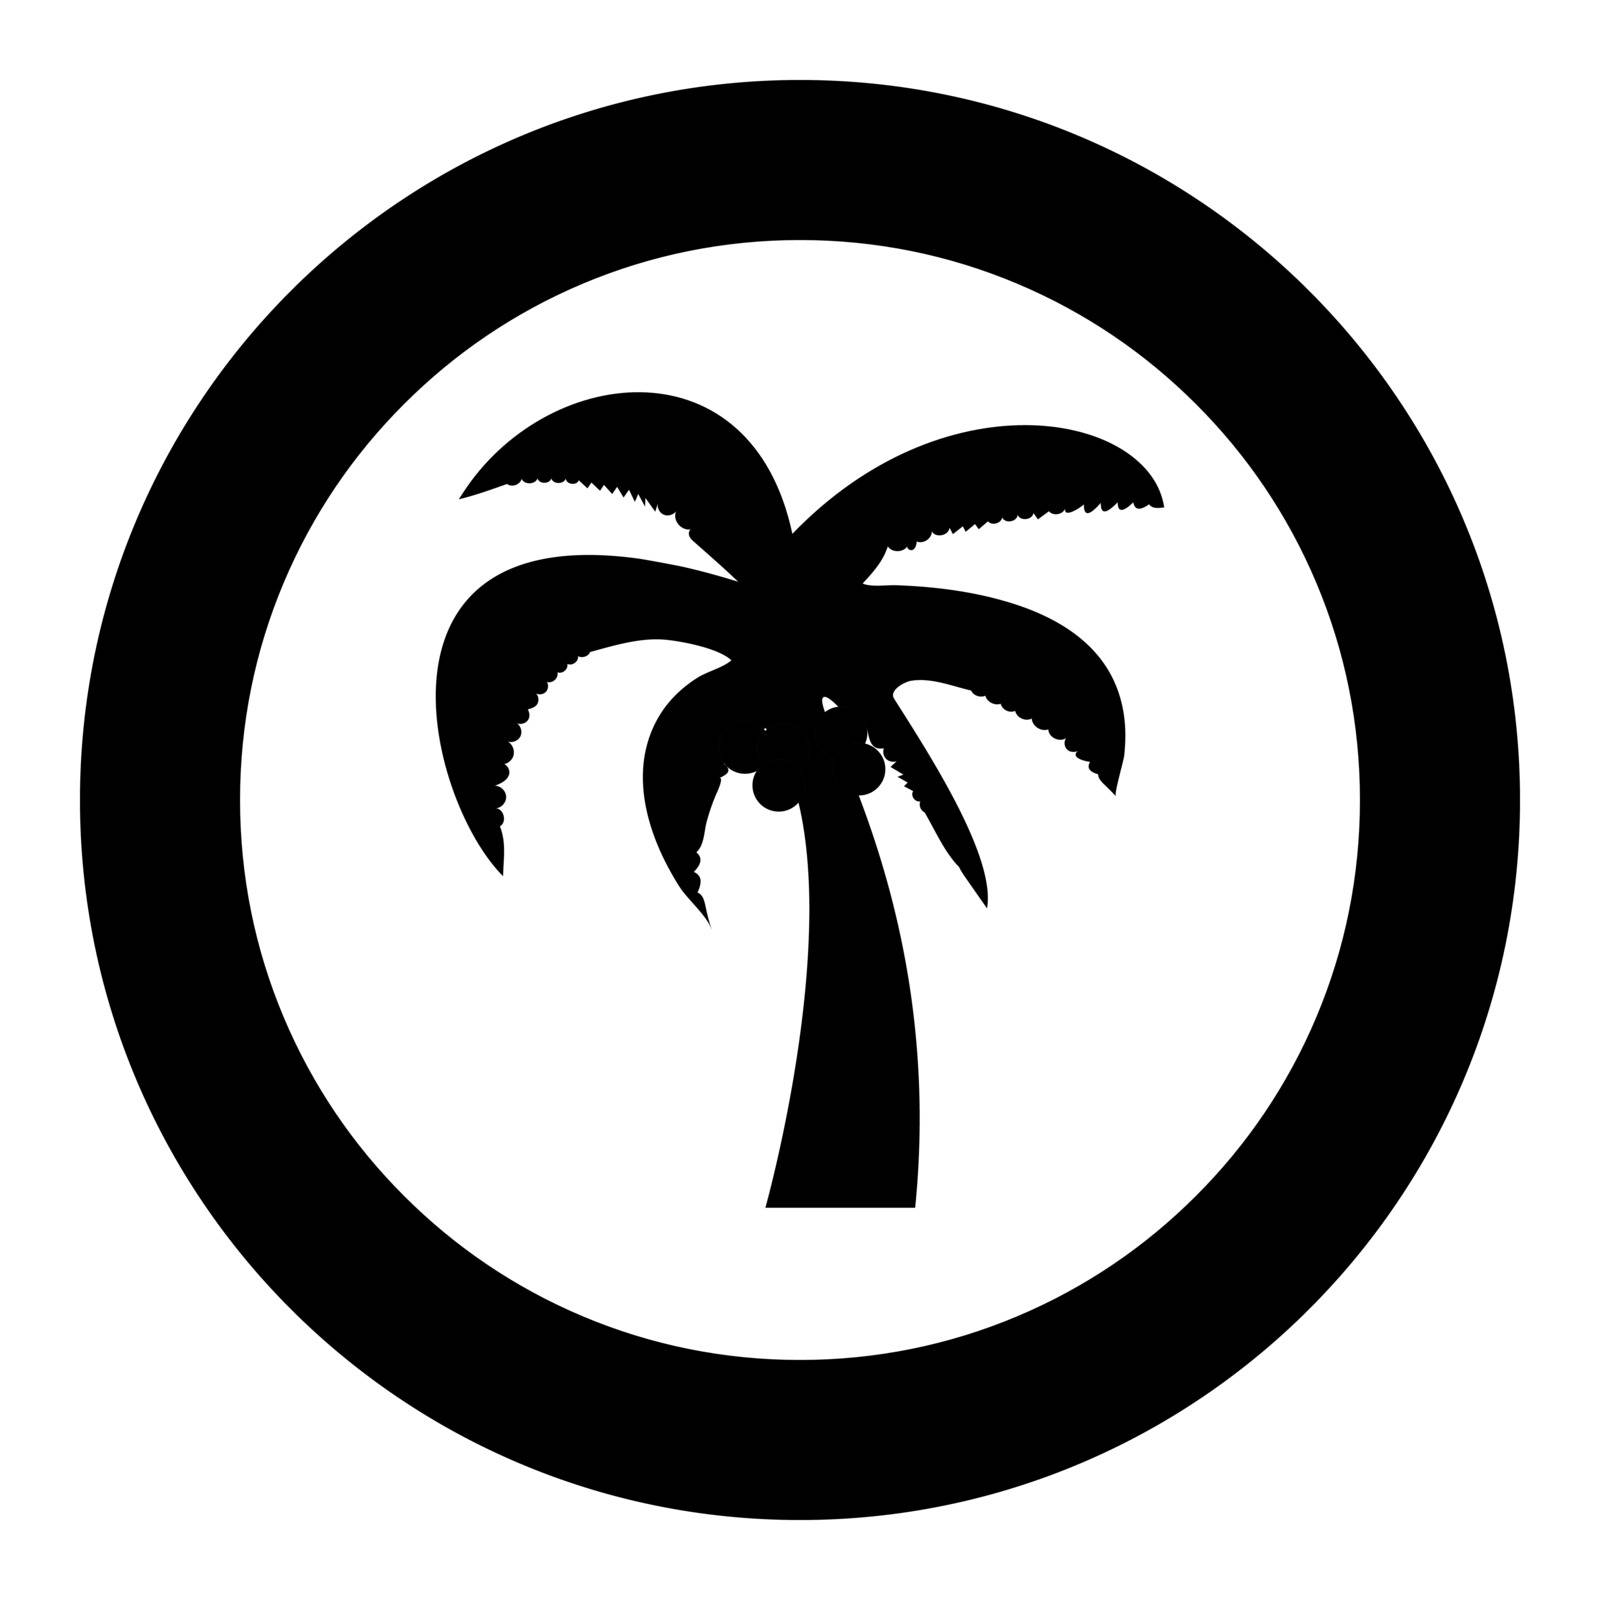 Palm icon black color in circle or round by serhii435